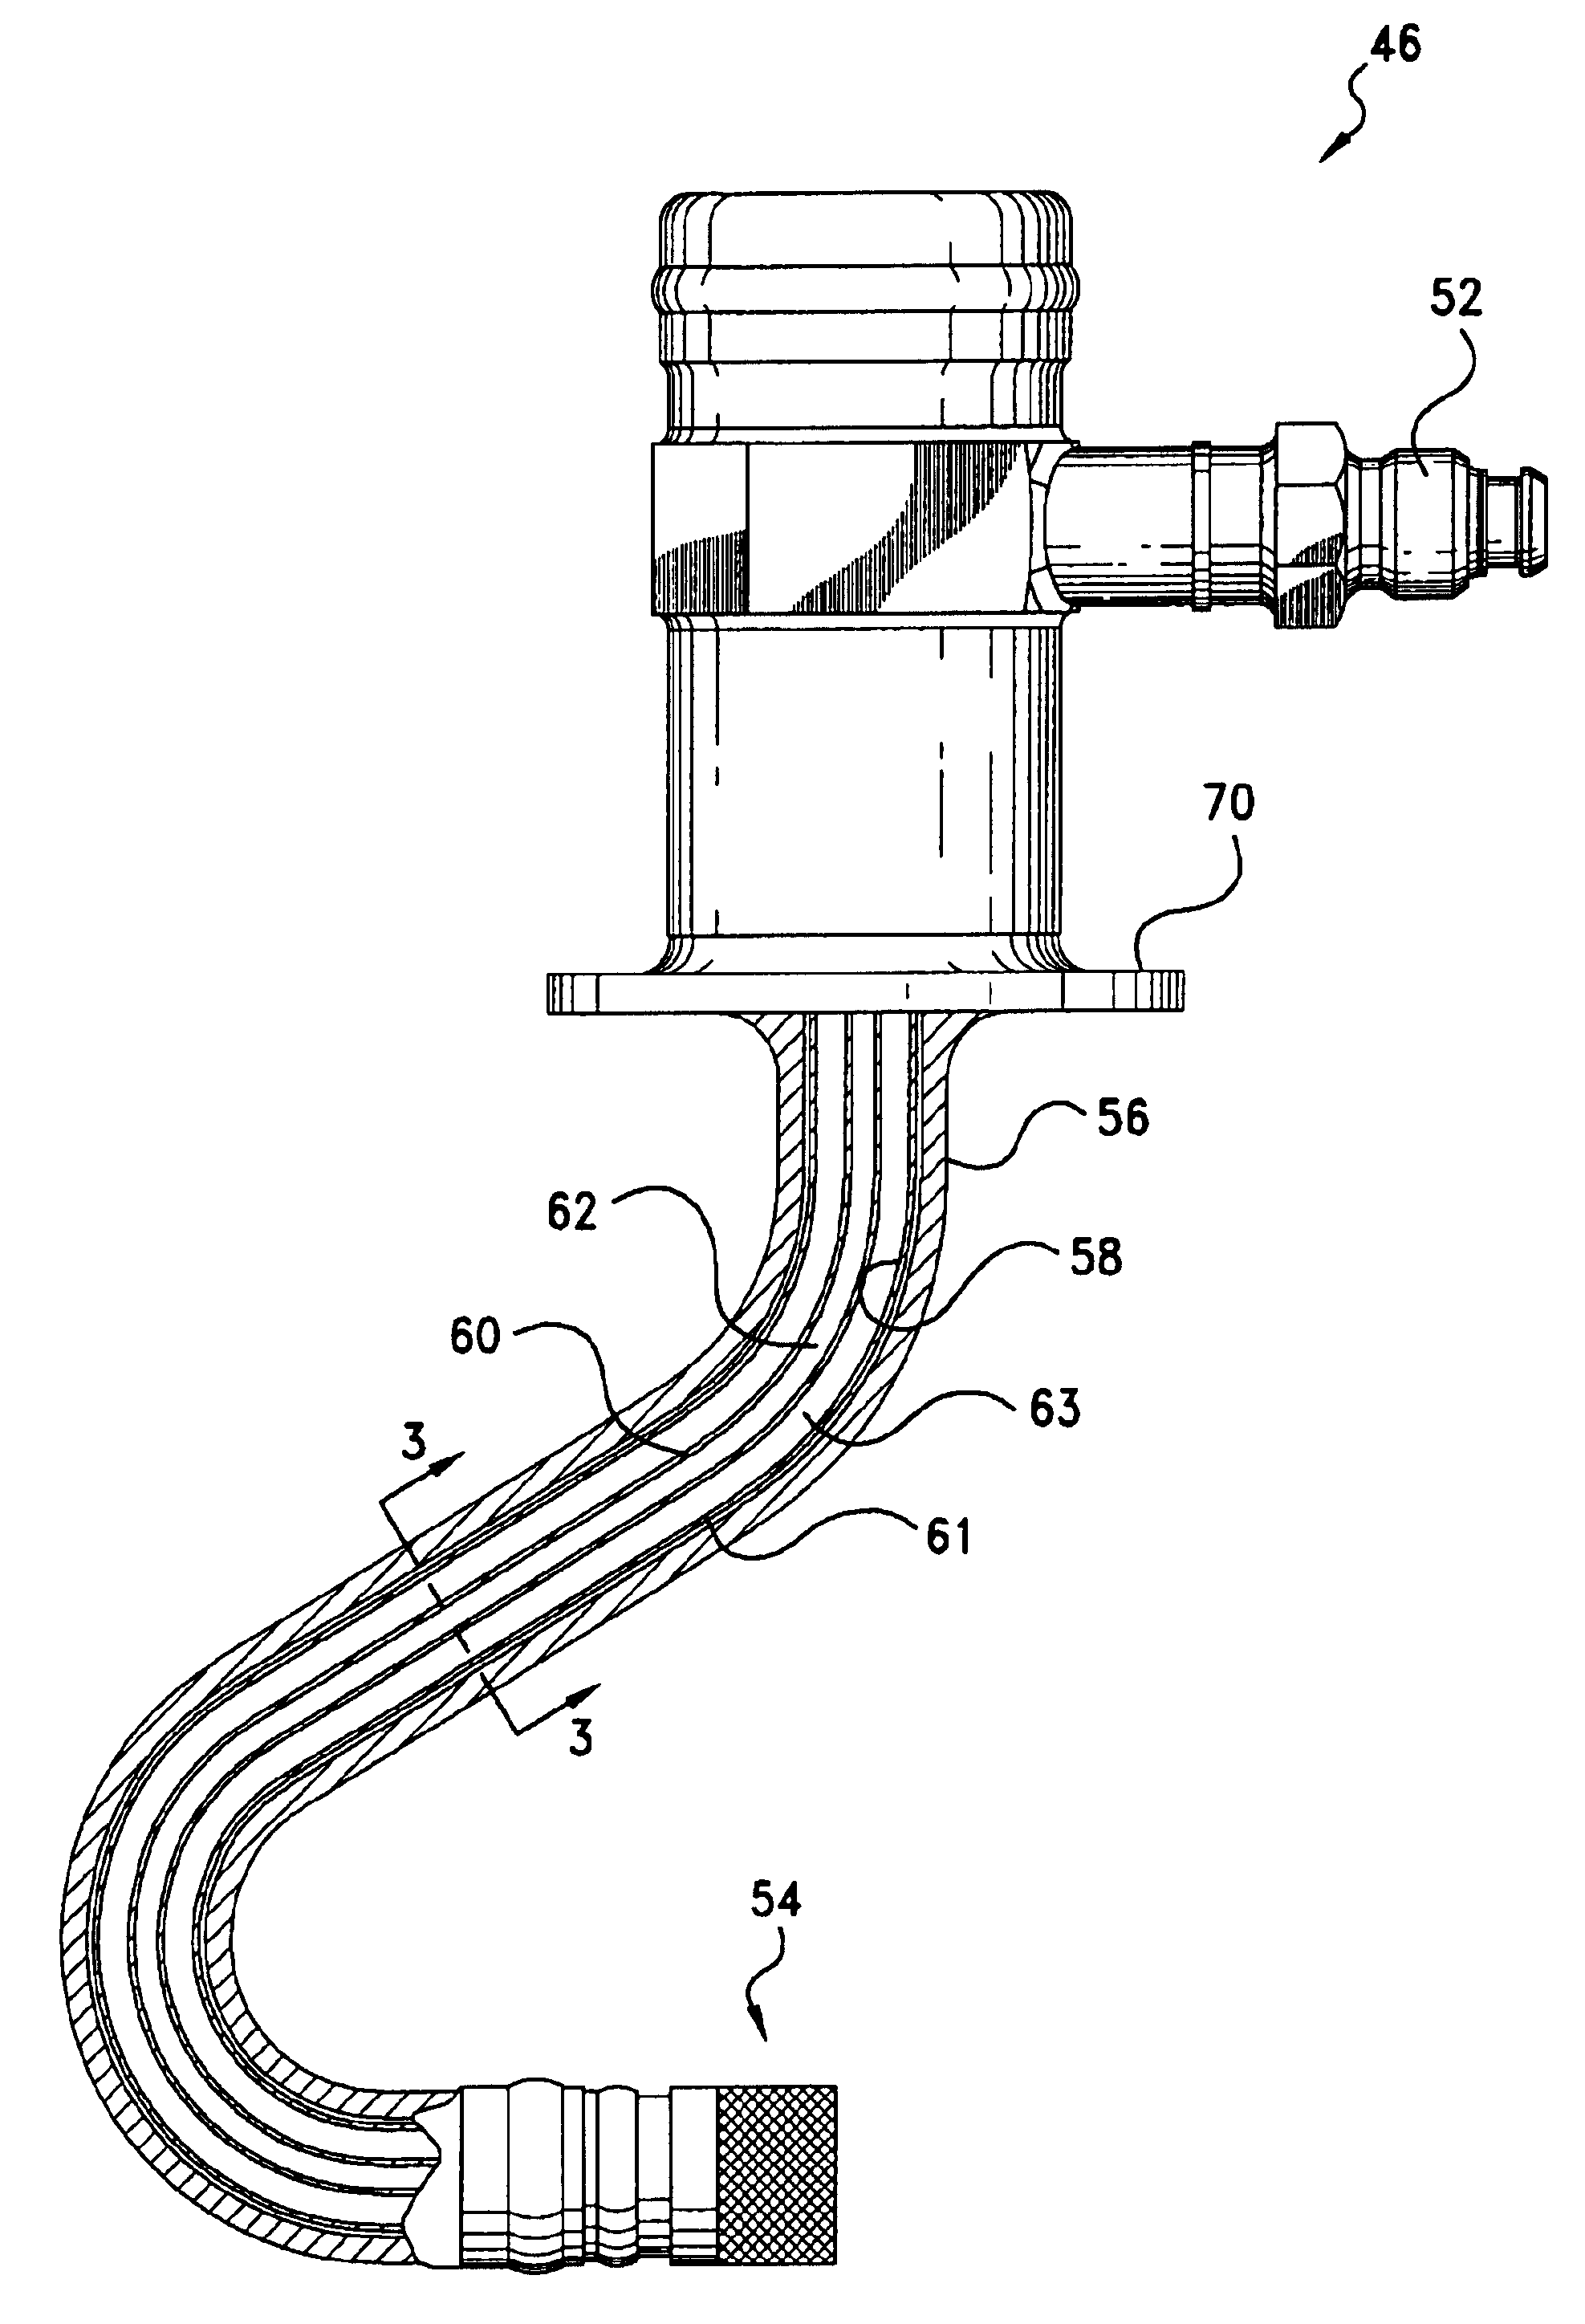 Nozzle with fluted tube